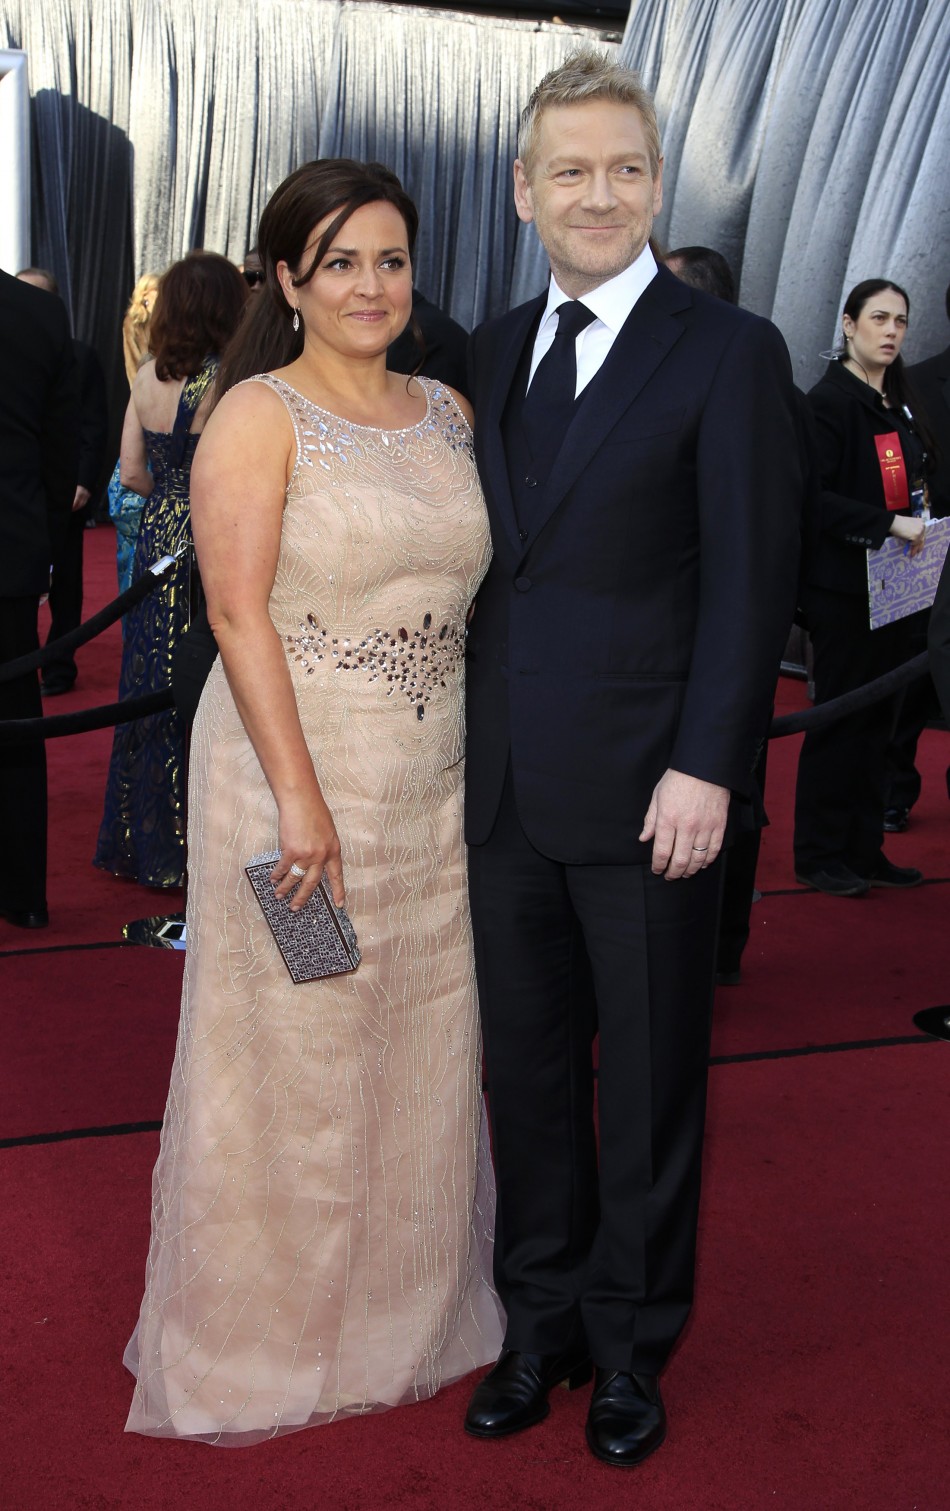 Actor Kenneth Branagh and his wife Lindsay Brunnock pose as they arrive at the 84th Academy Awards in Hollywood